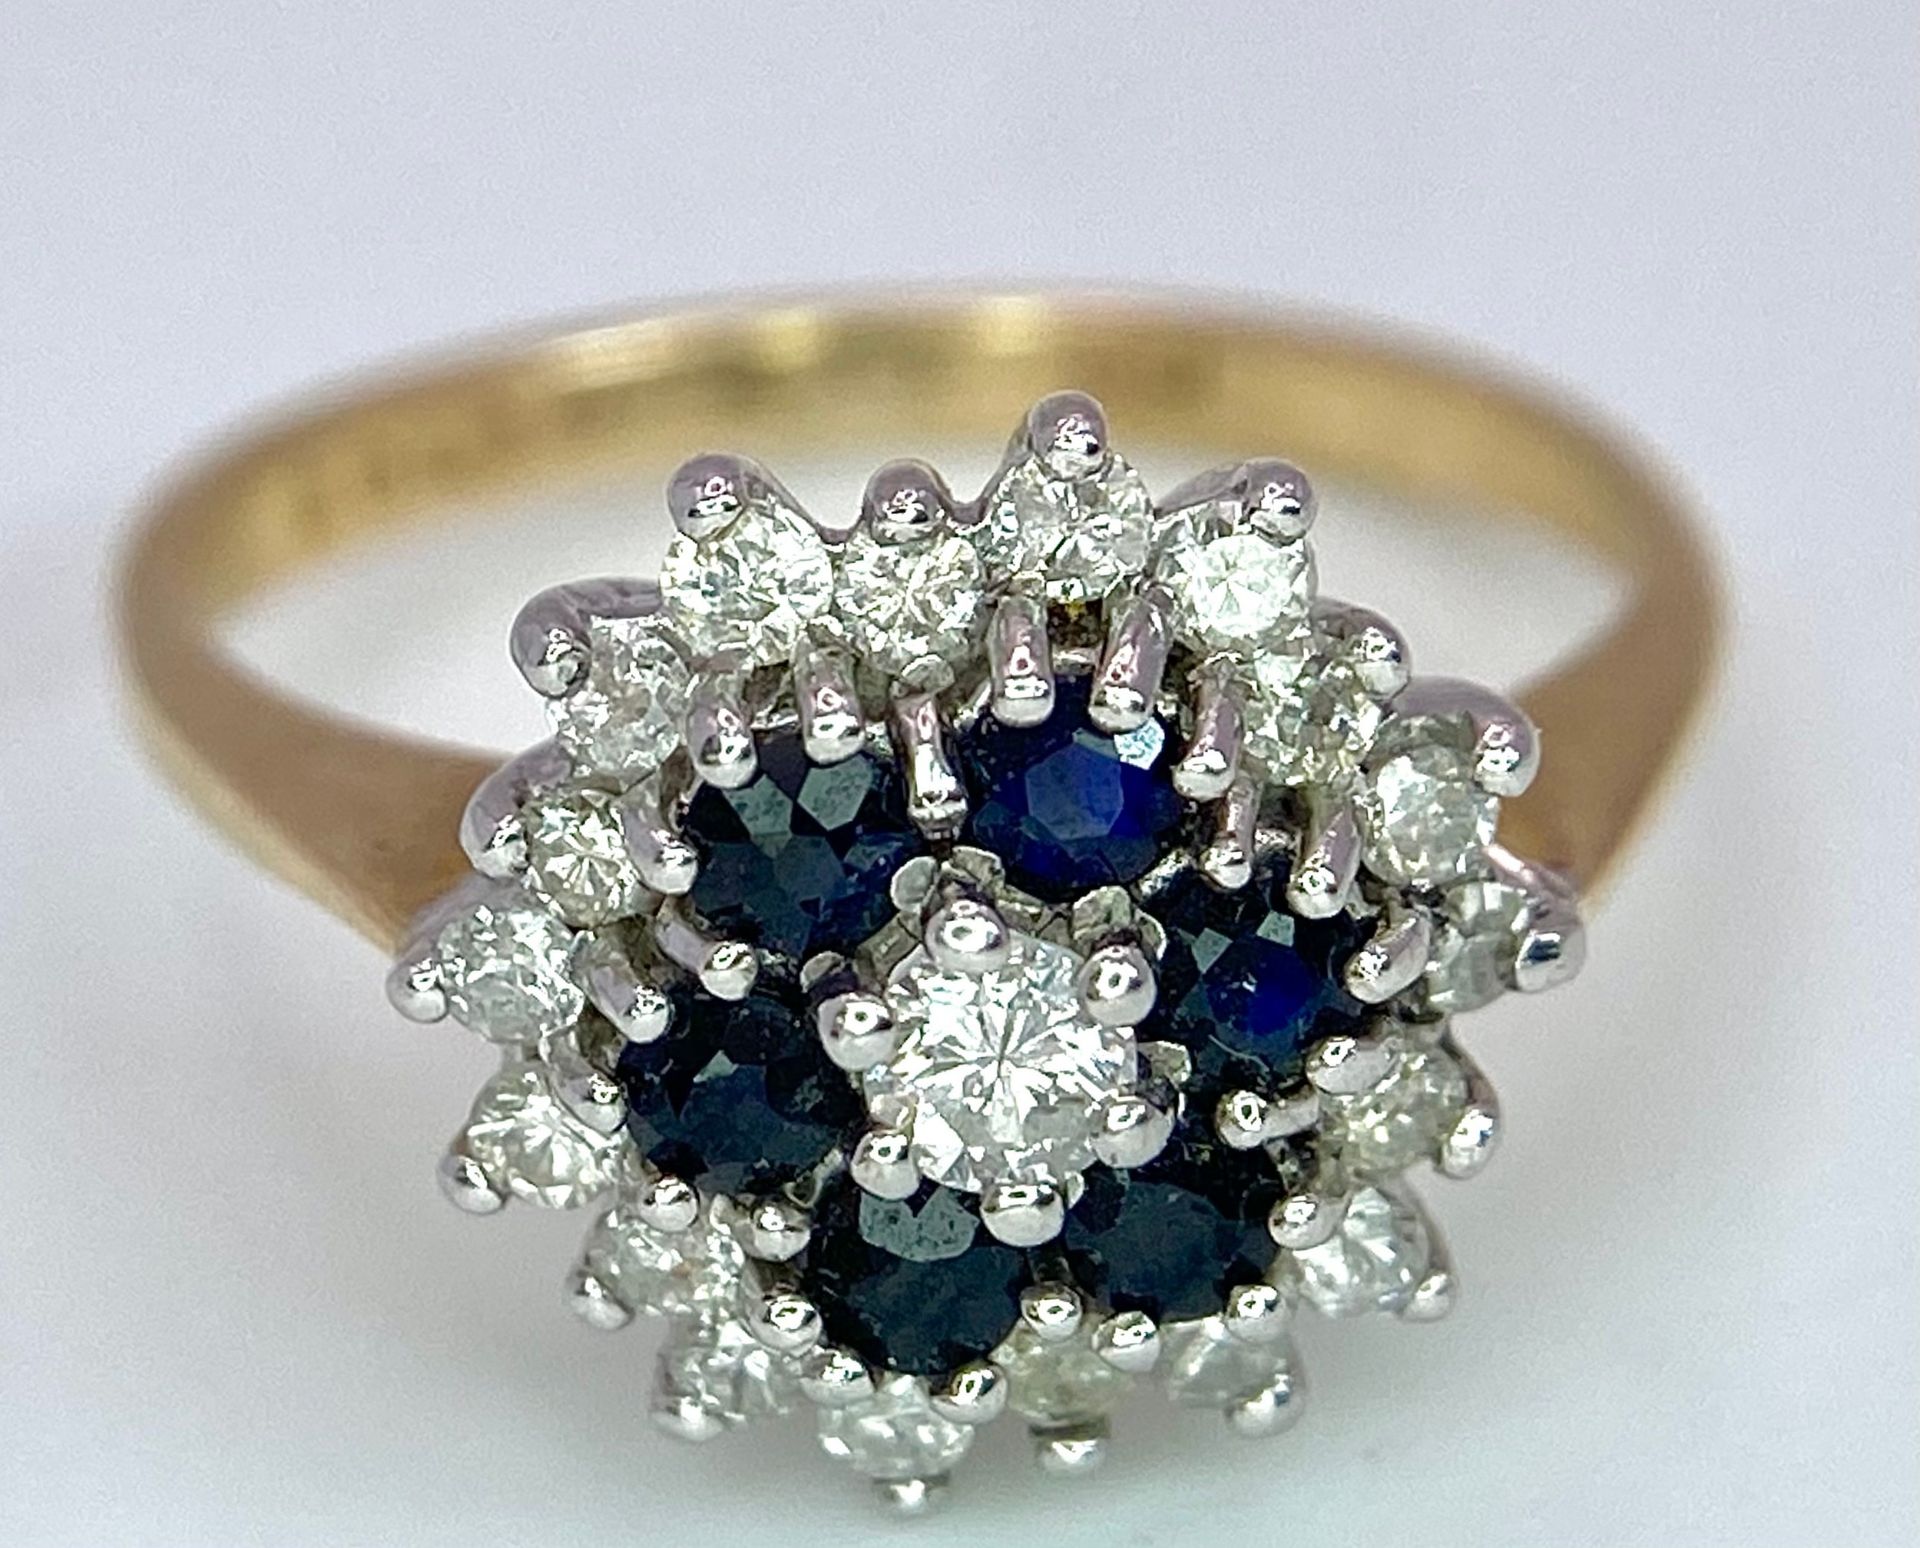 A 9K YELLOW GOLD DIAMOND & SAPPHIRE CLUSTER RING 2.5G SIZE J SPAS 9019 - Image 4 of 7